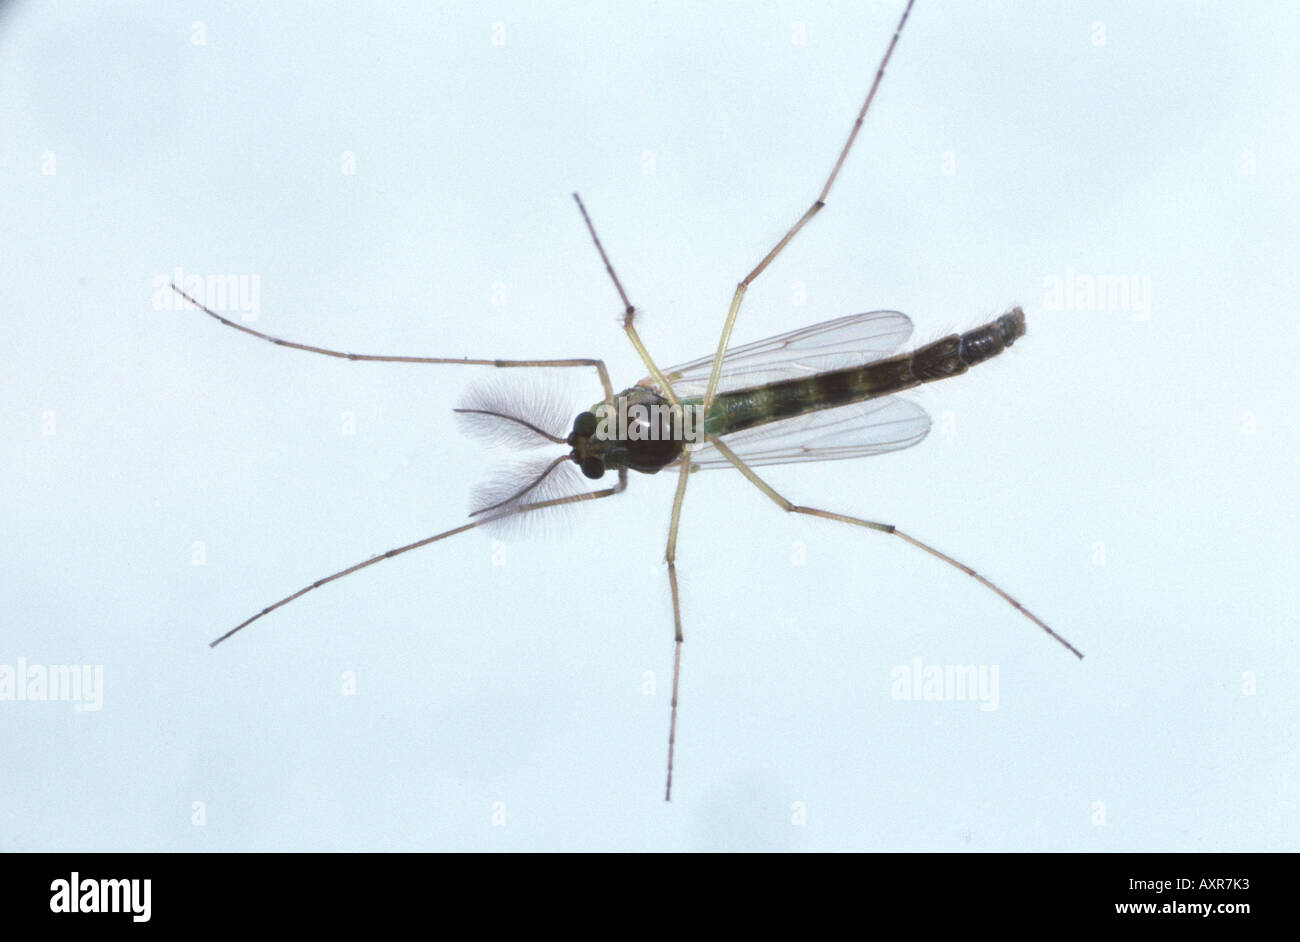 Adult male chironomid midge Chironomus riparius used as a toxicology indicator species Stock Photo